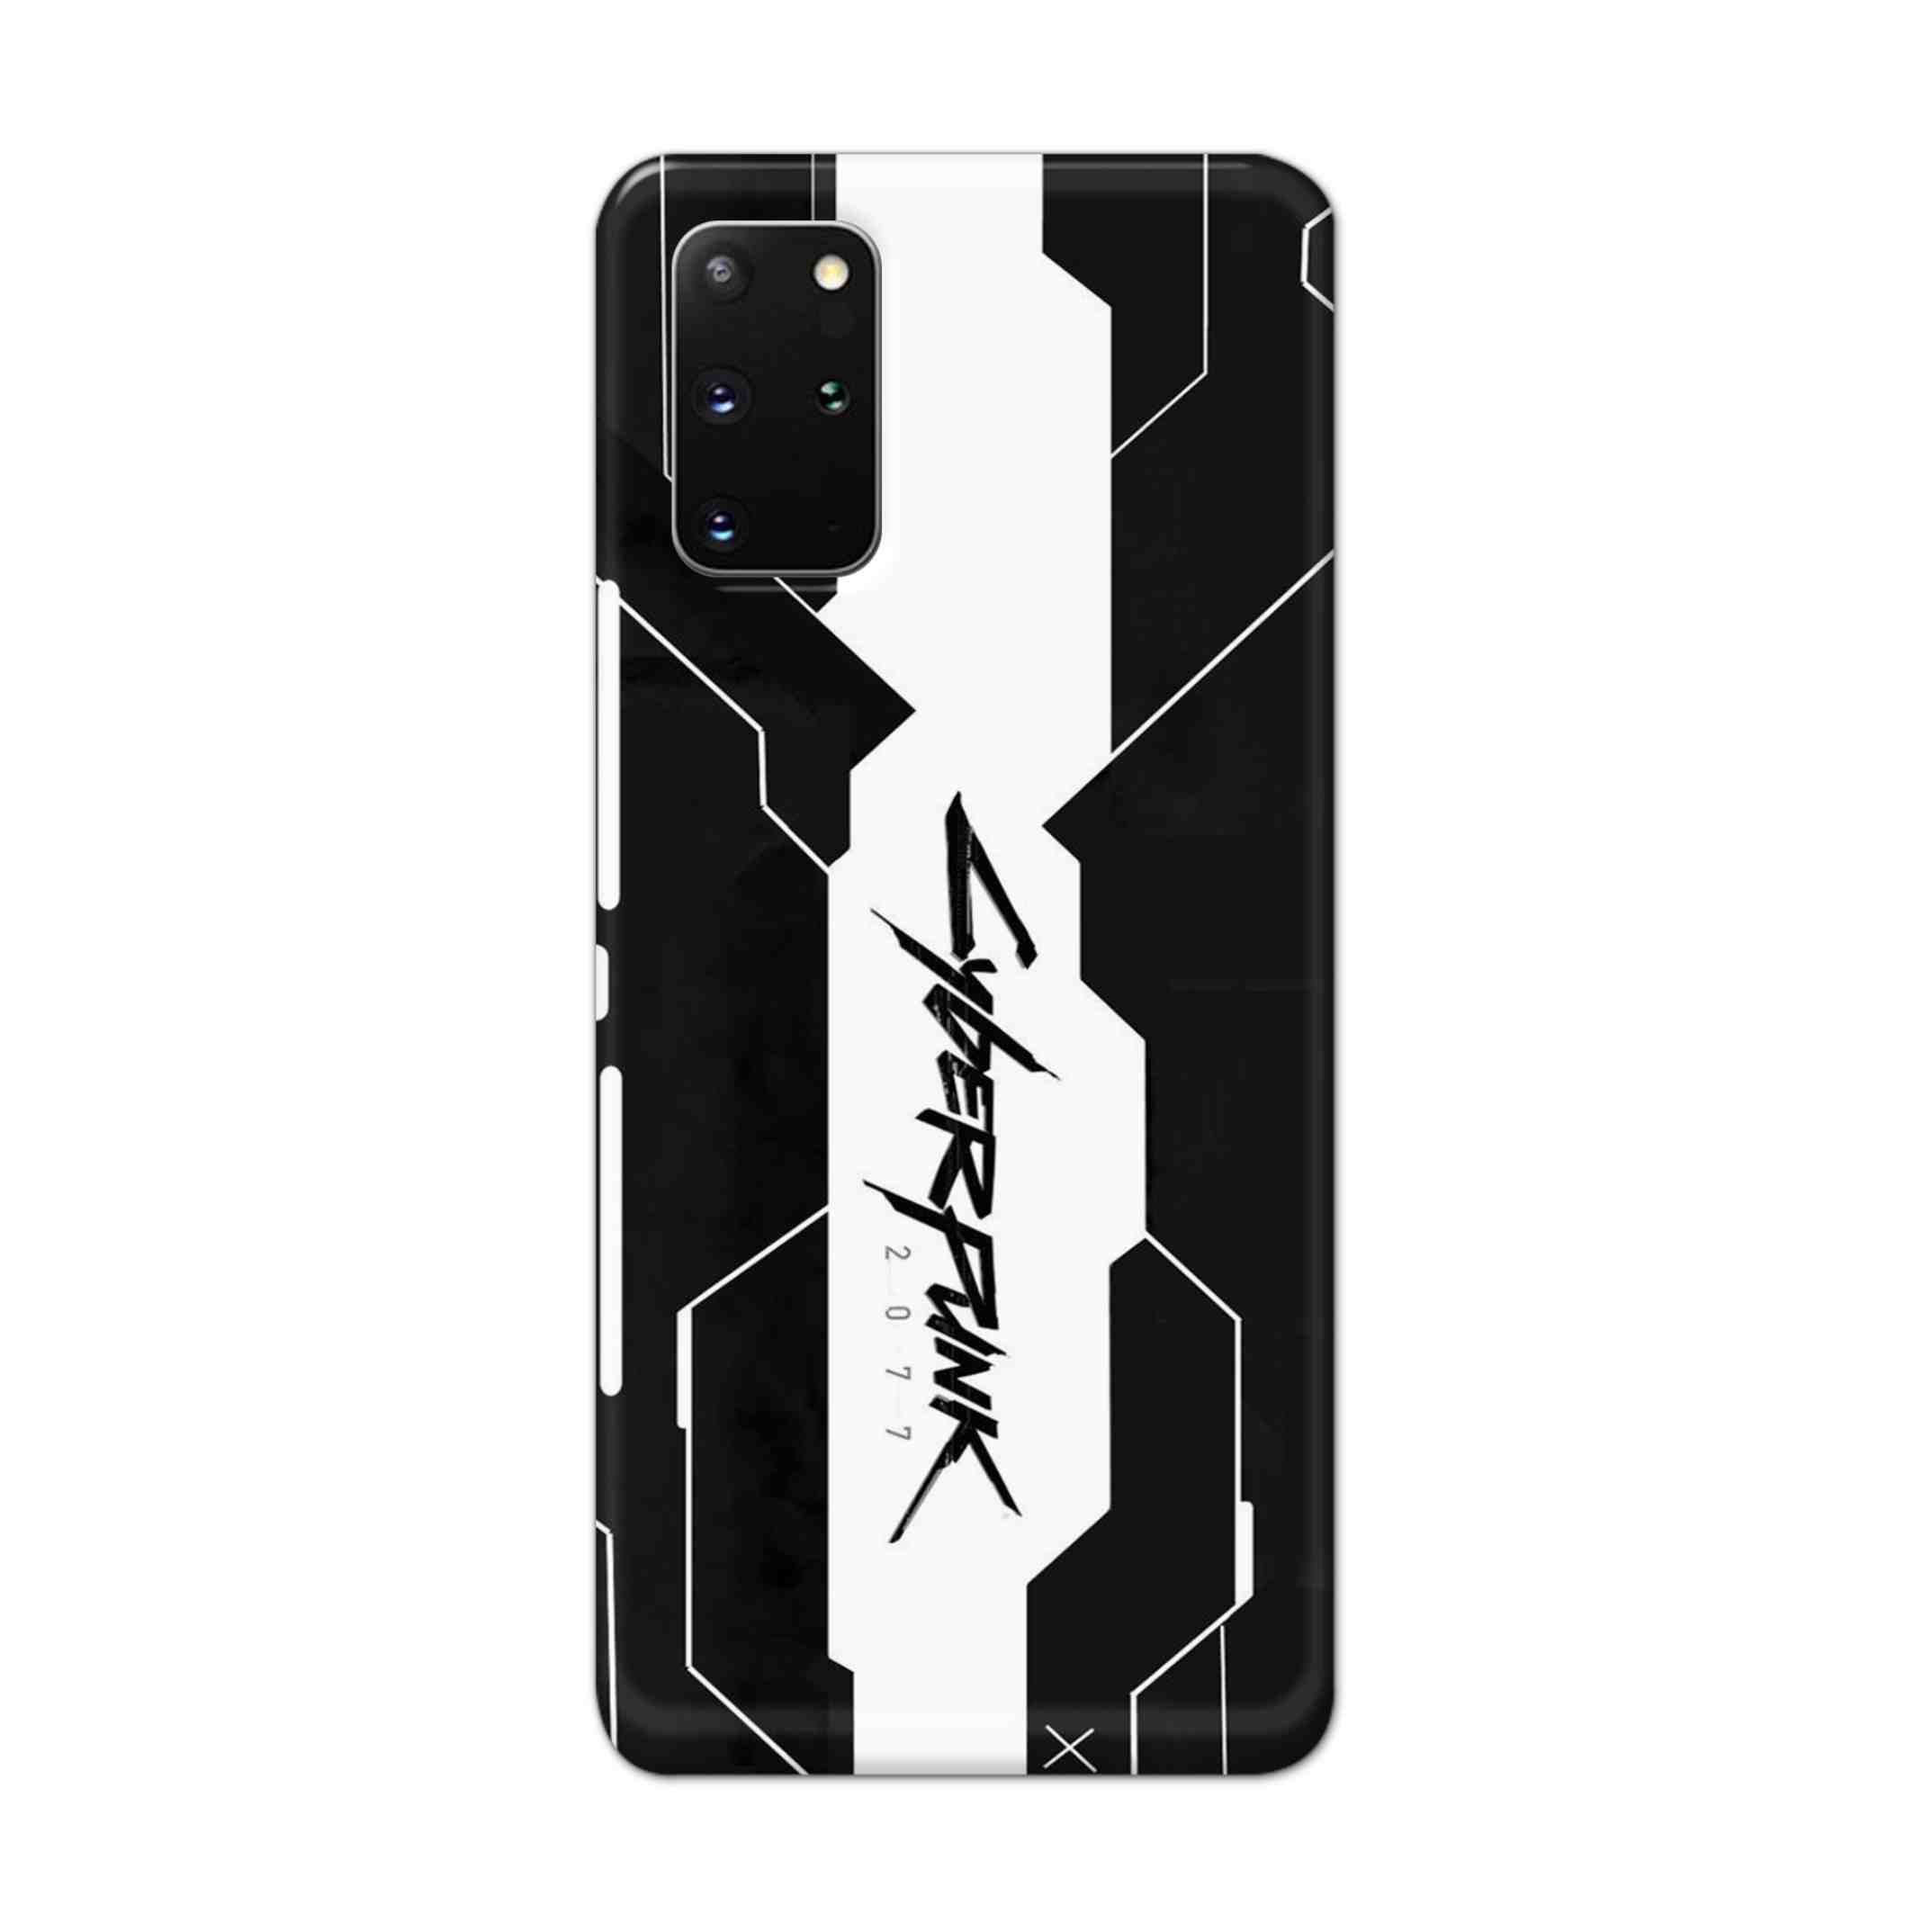 Buy Cyberpunk 2077 Art Hard Back Mobile Phone Case Cover For Samsung Galaxy S20 Plus Online